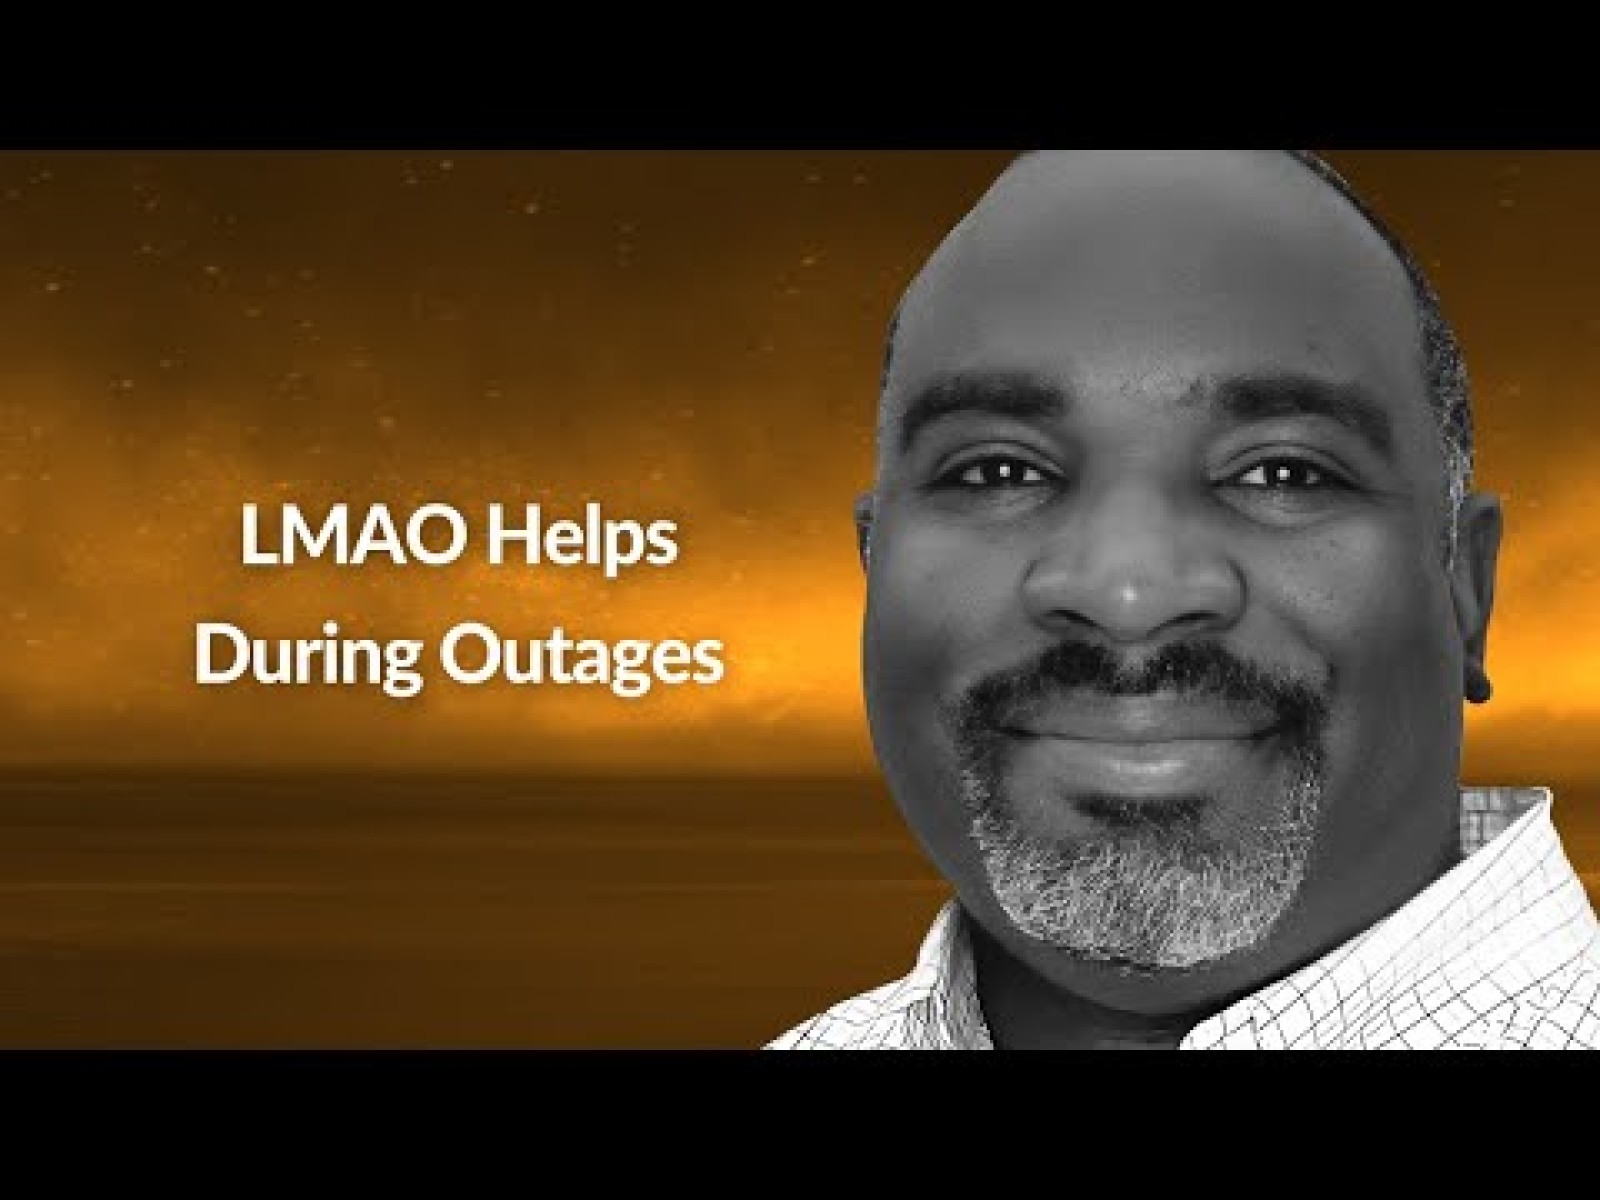 LMAO Helps During Outages